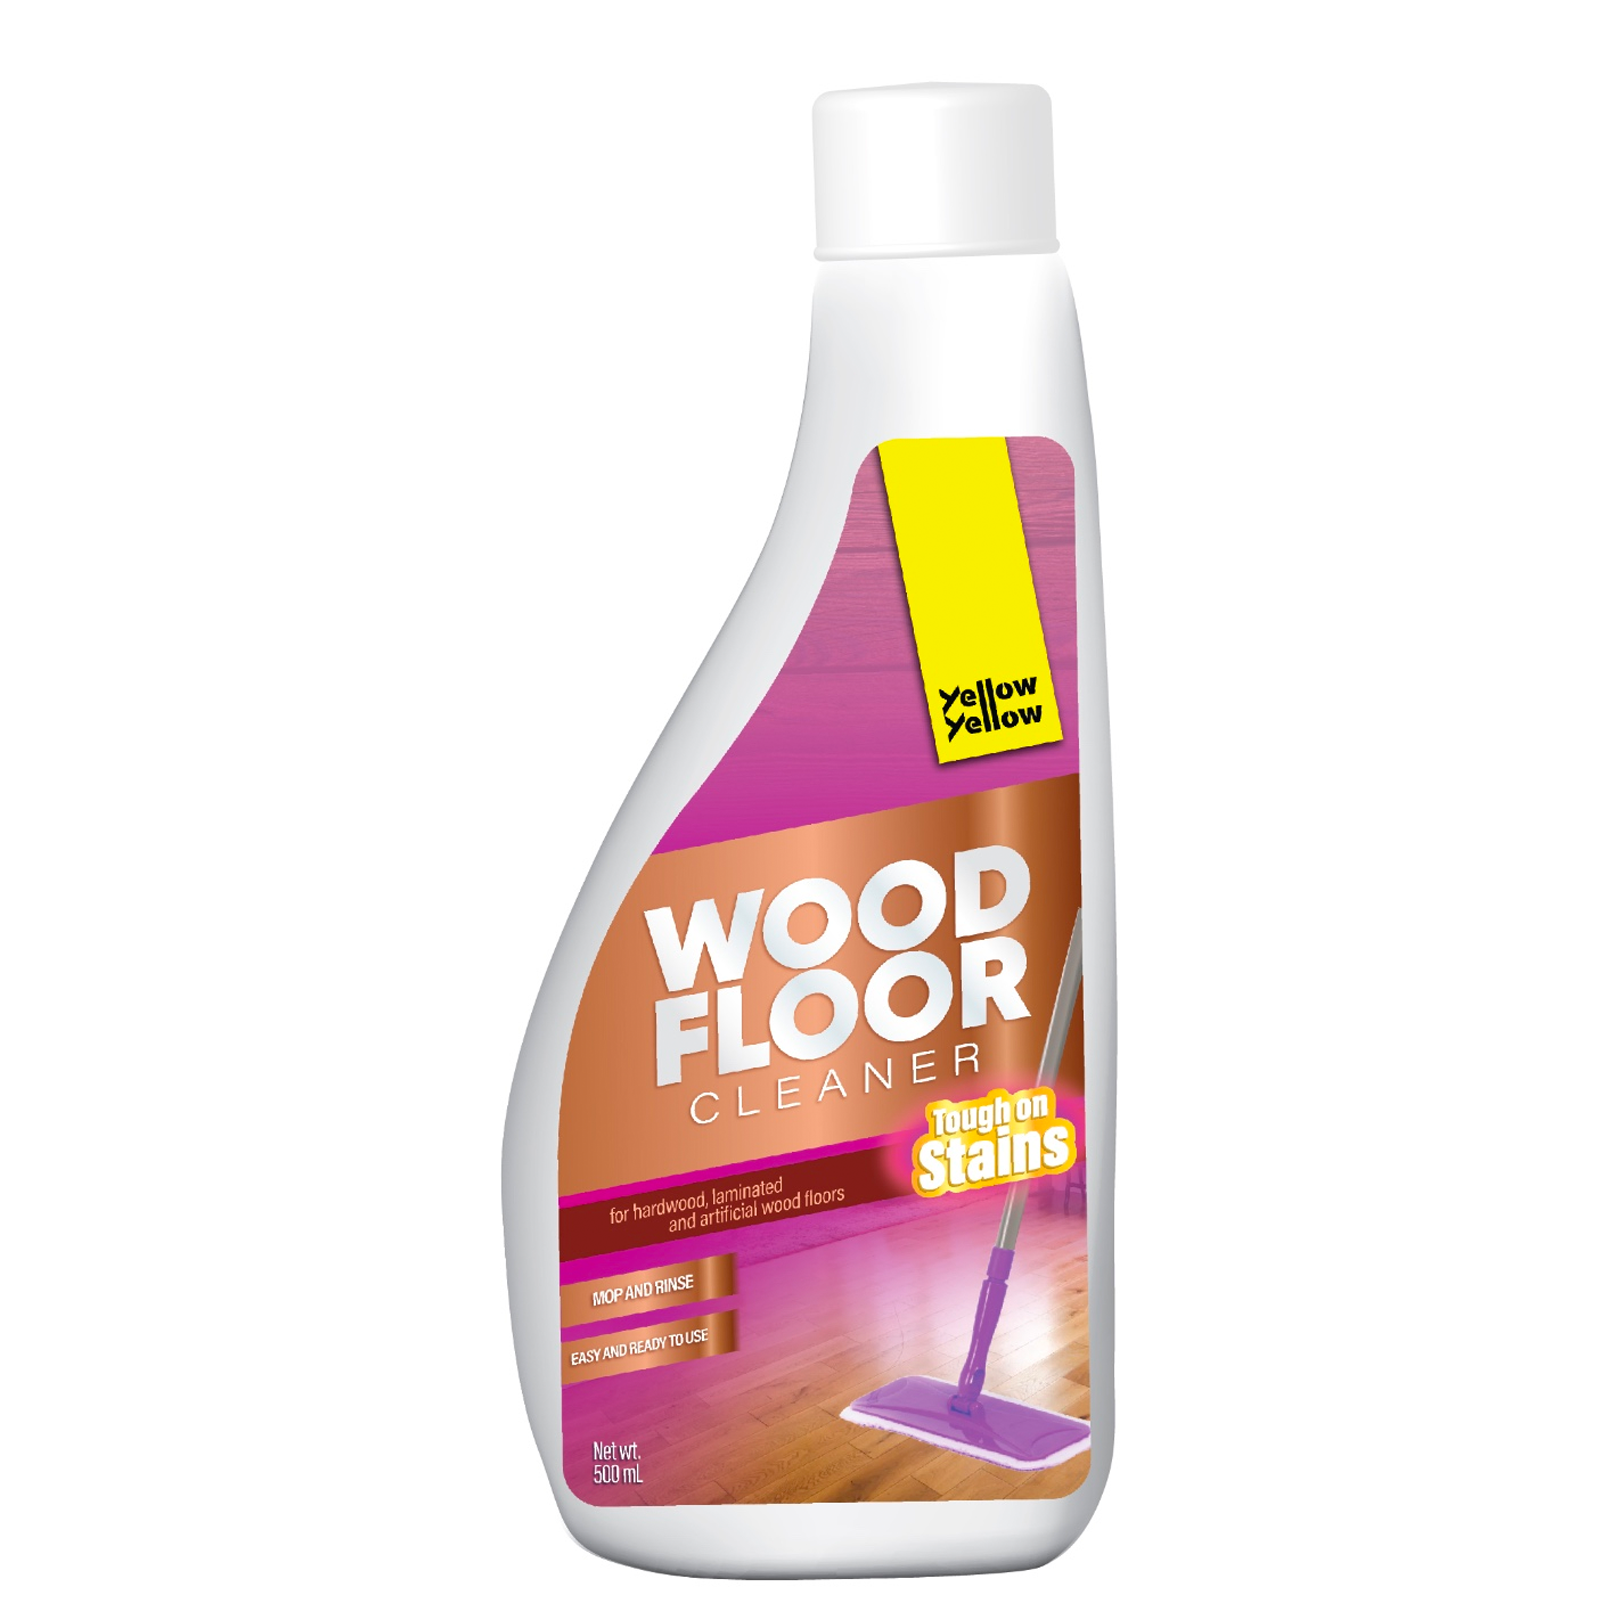 Yellowyellow WOOD FLOOR CLEANER 500ML TOUGH IN STAINS